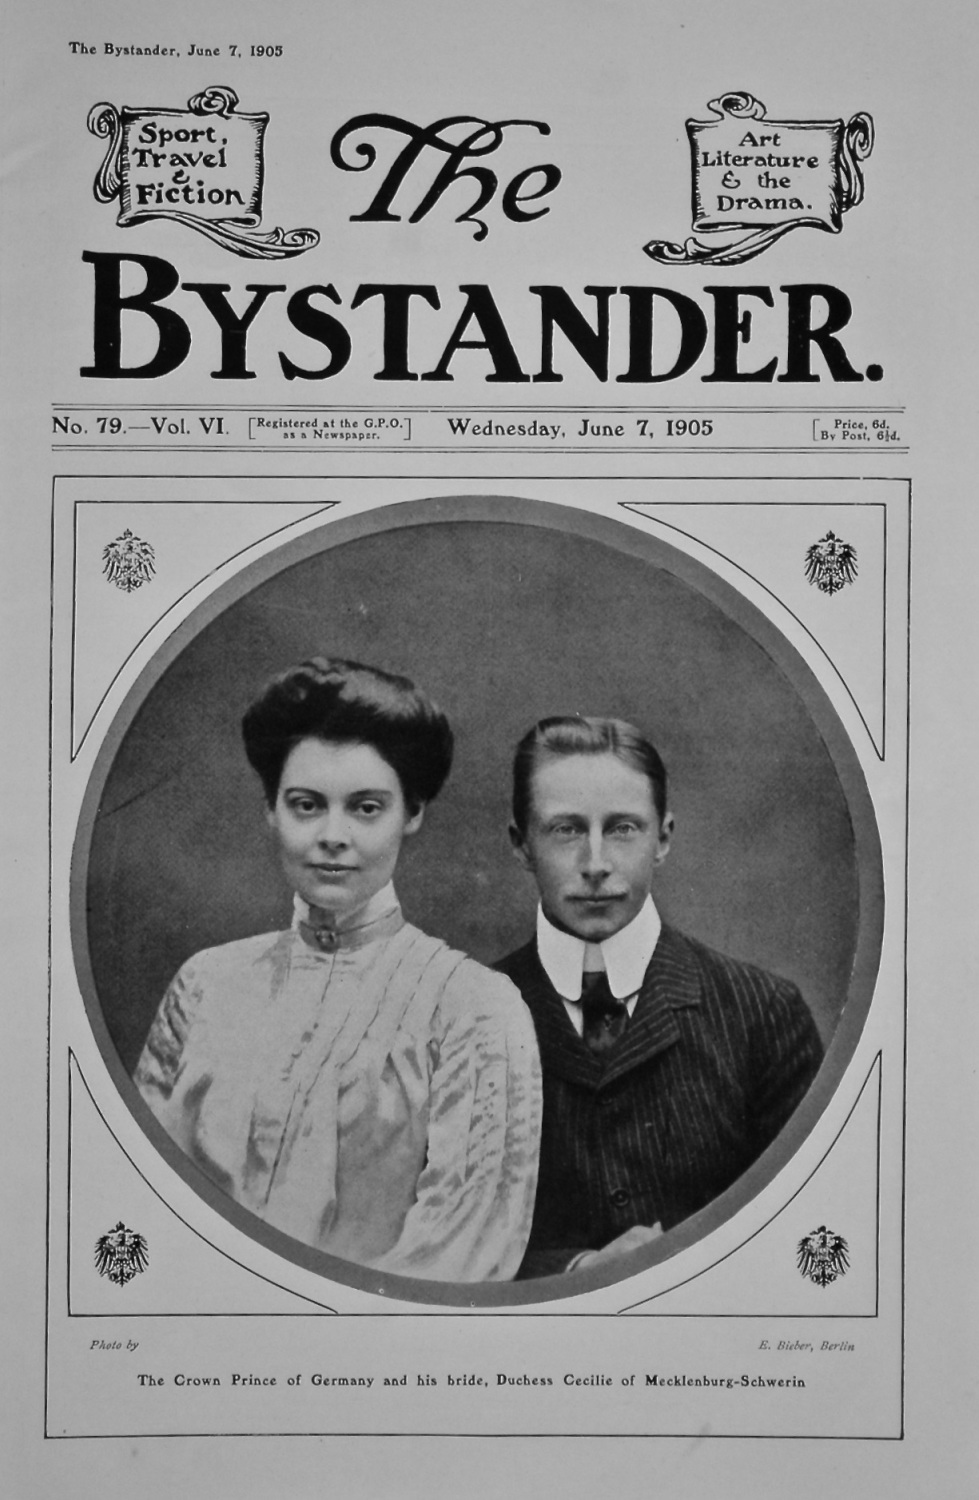 The Bystander. June 7th, 1905. (Front Page).